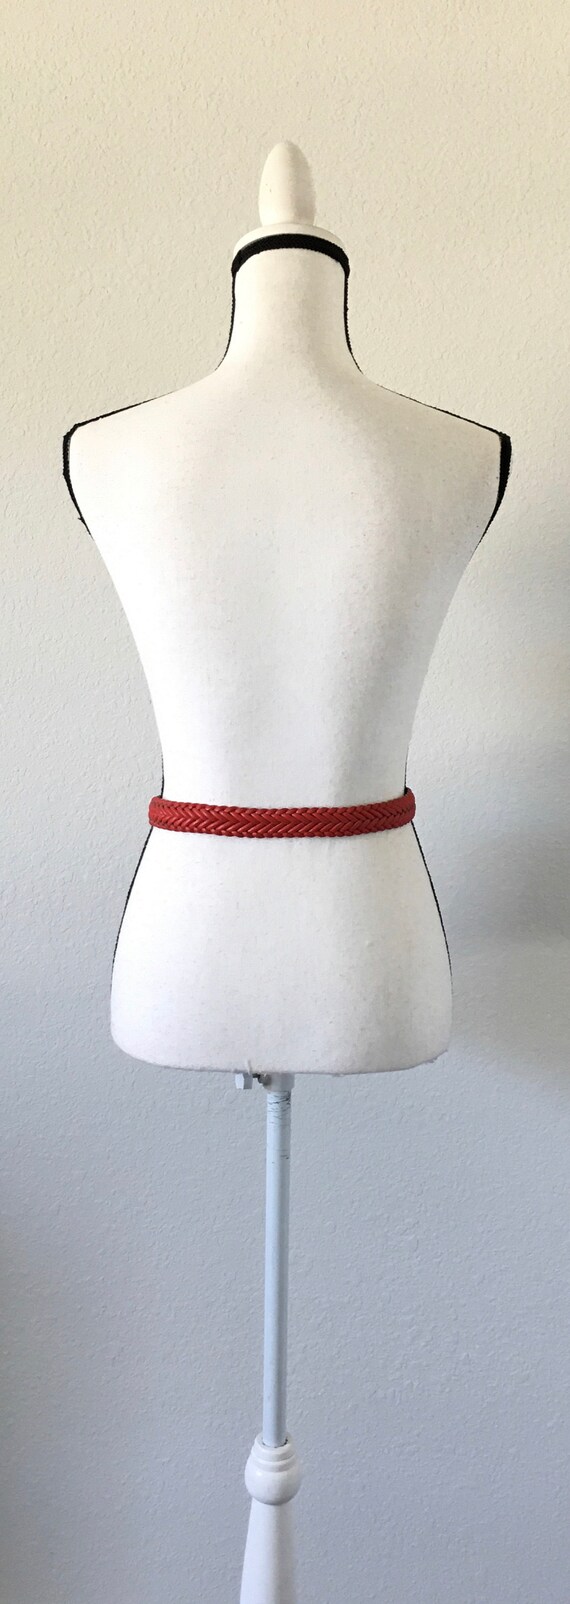 1990s Red Woven Leather Belt, Vintage Braided Lea… - image 3